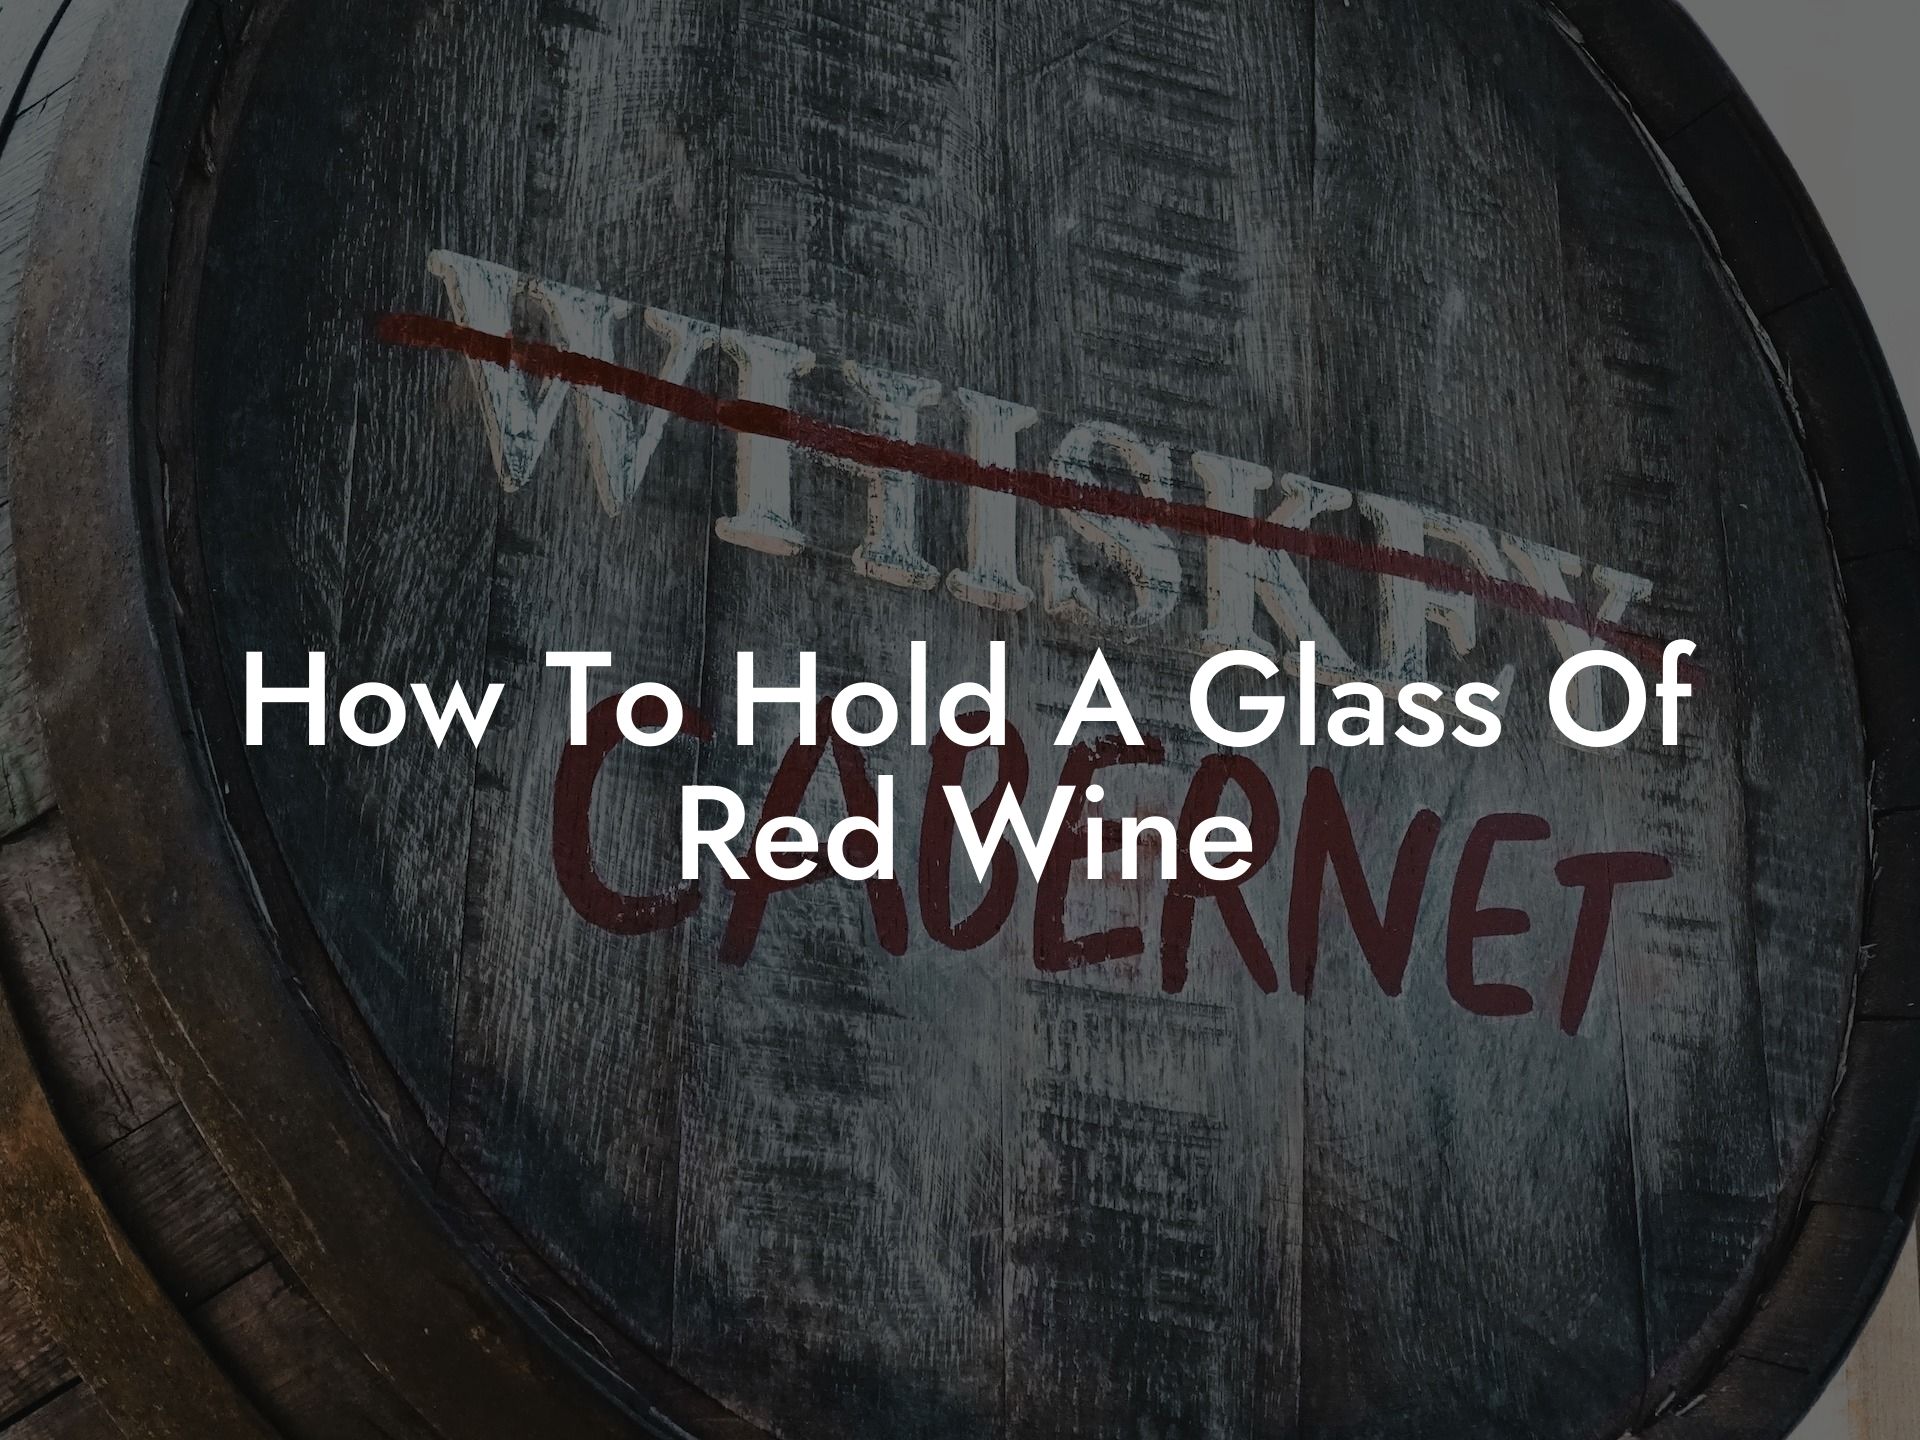 How To Hold A Glass Of Red Wine